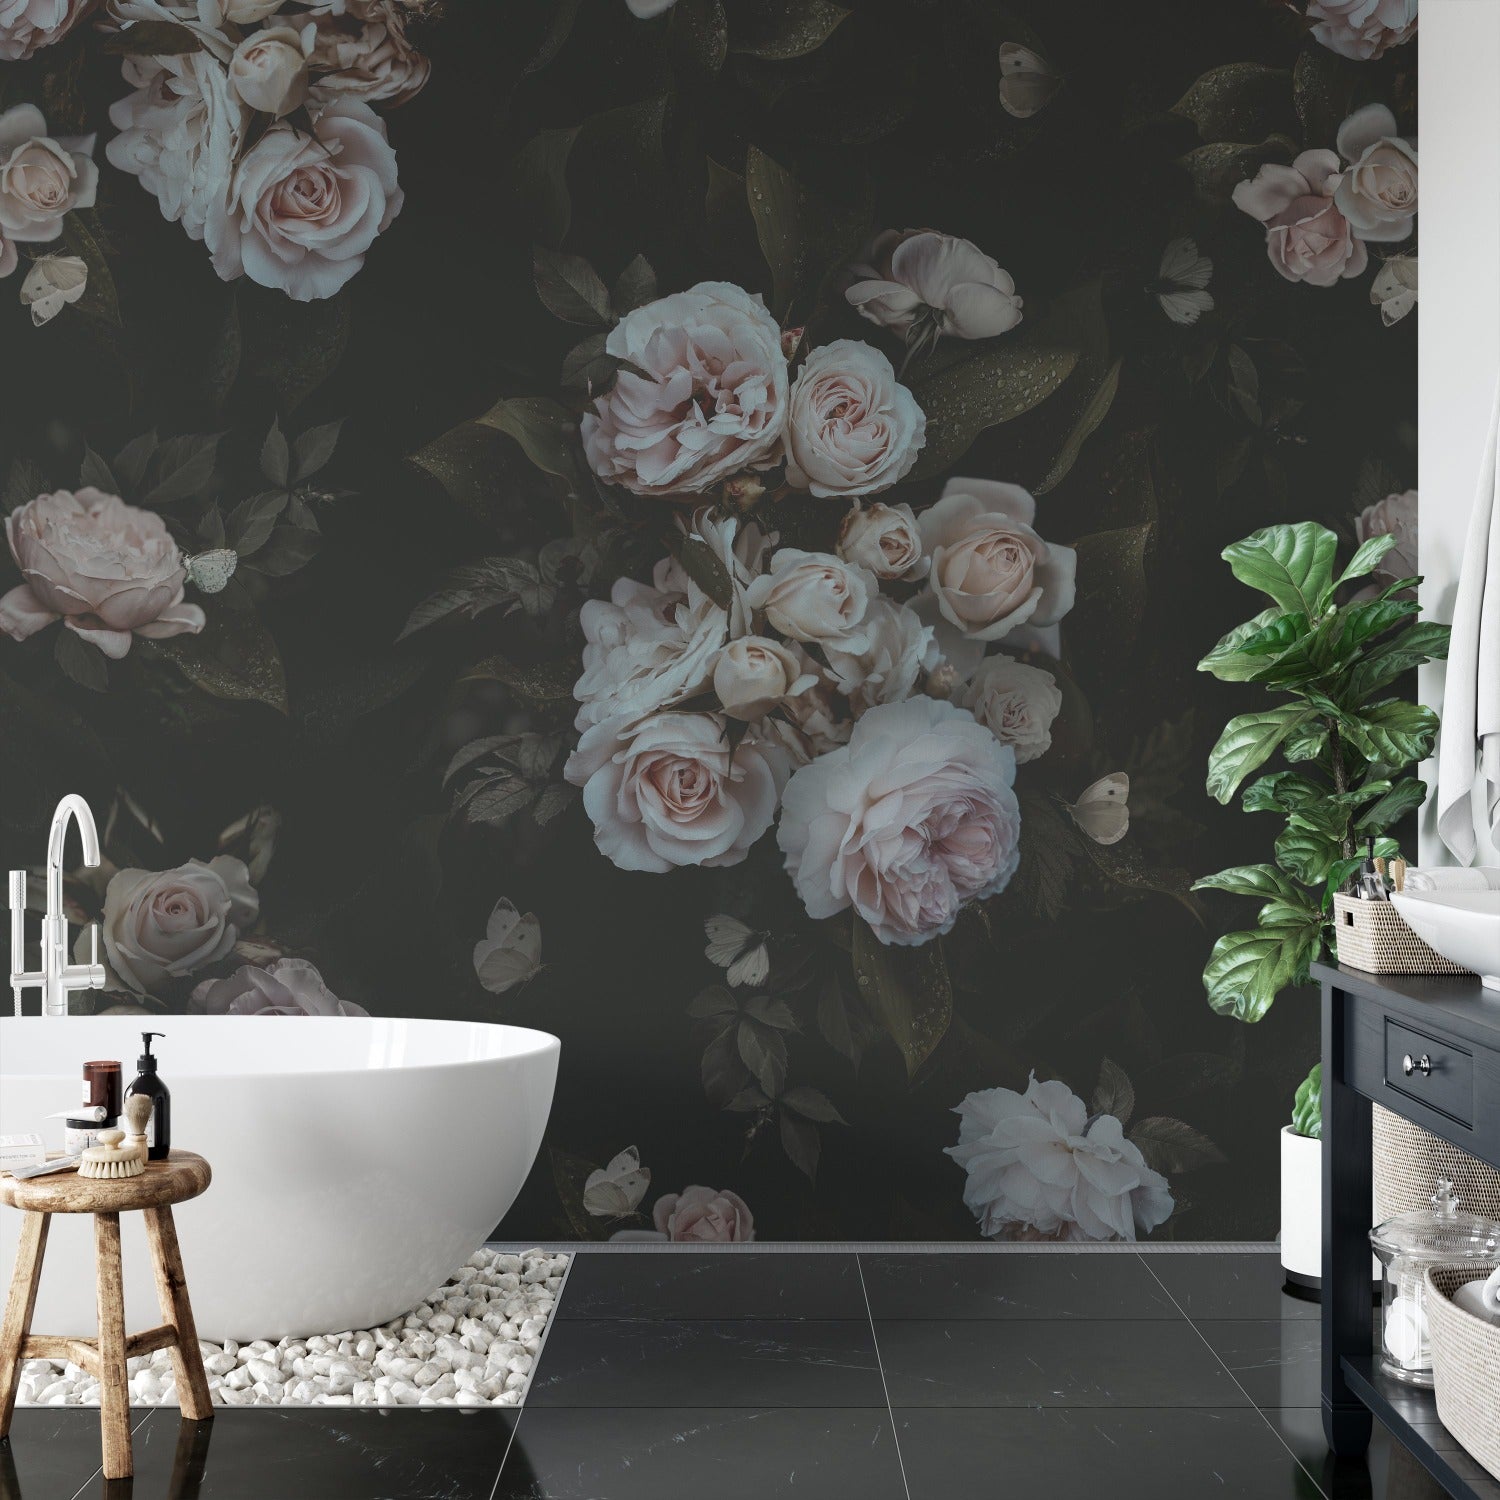 A luxurious bathroom featuring the Dark Rose Wallpaper - 75" on the wall behind a freestanding white bathtub, where the dark florals add an element of gothic romance to the modern and sleek decor